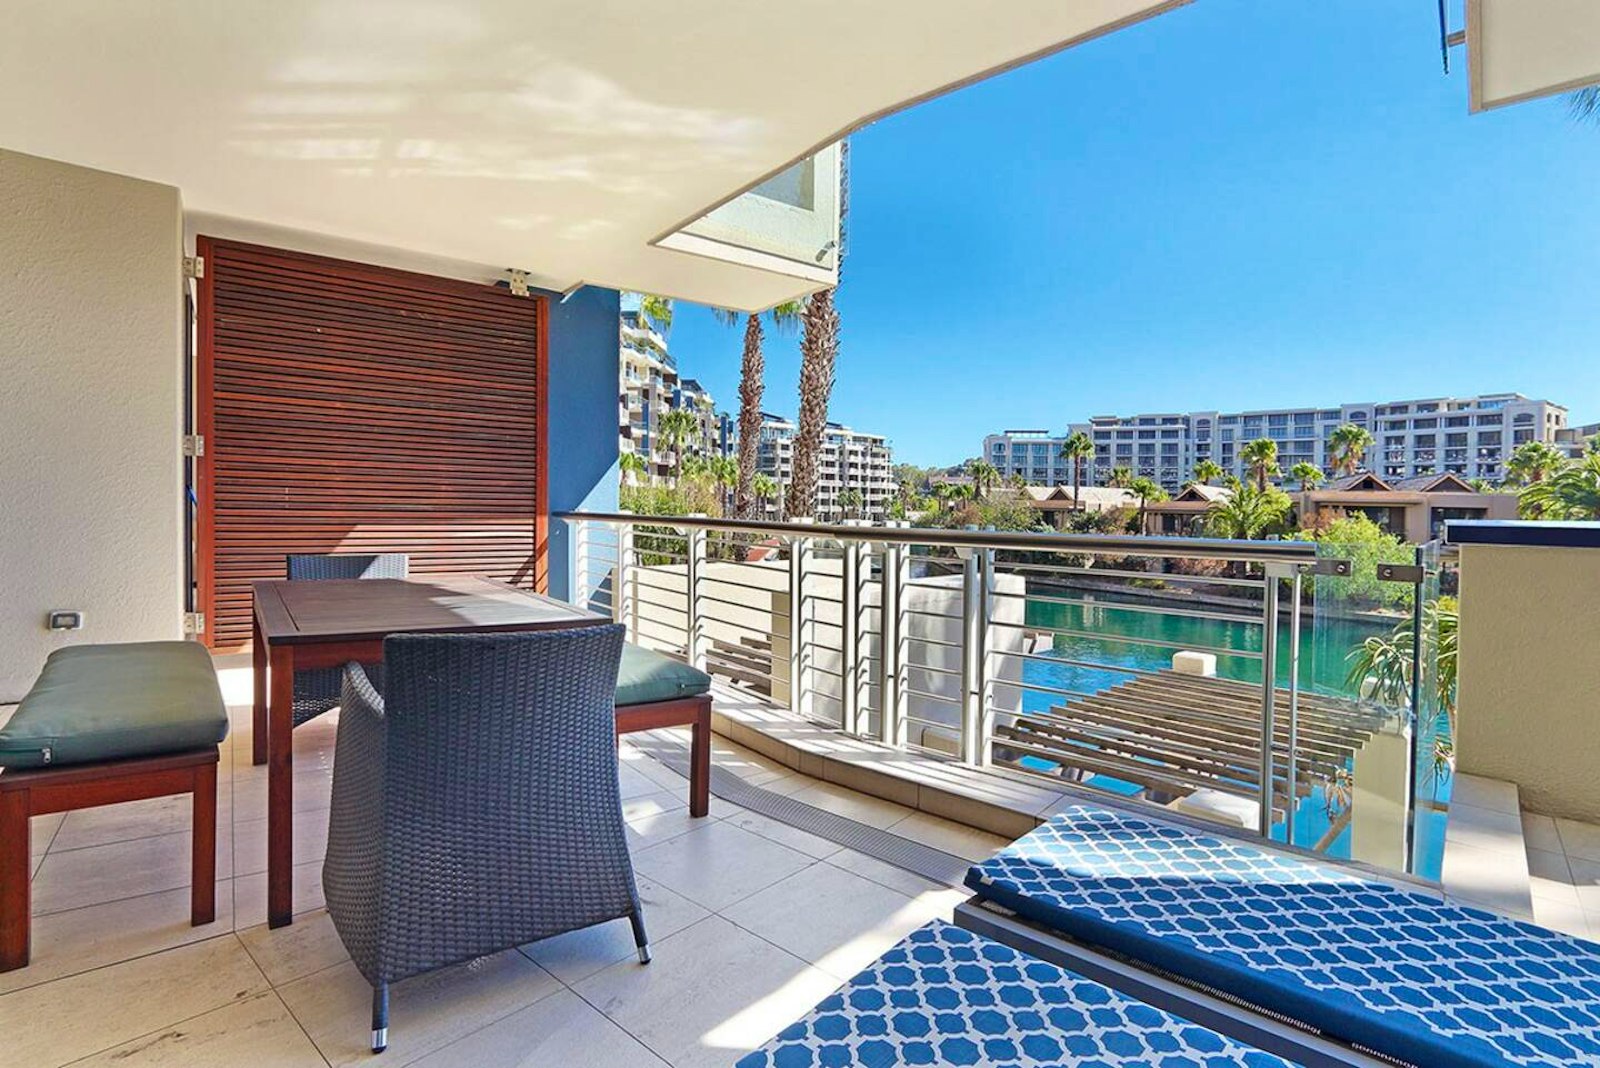 V&A Waterfront offers private Cape Town self-catering apartments